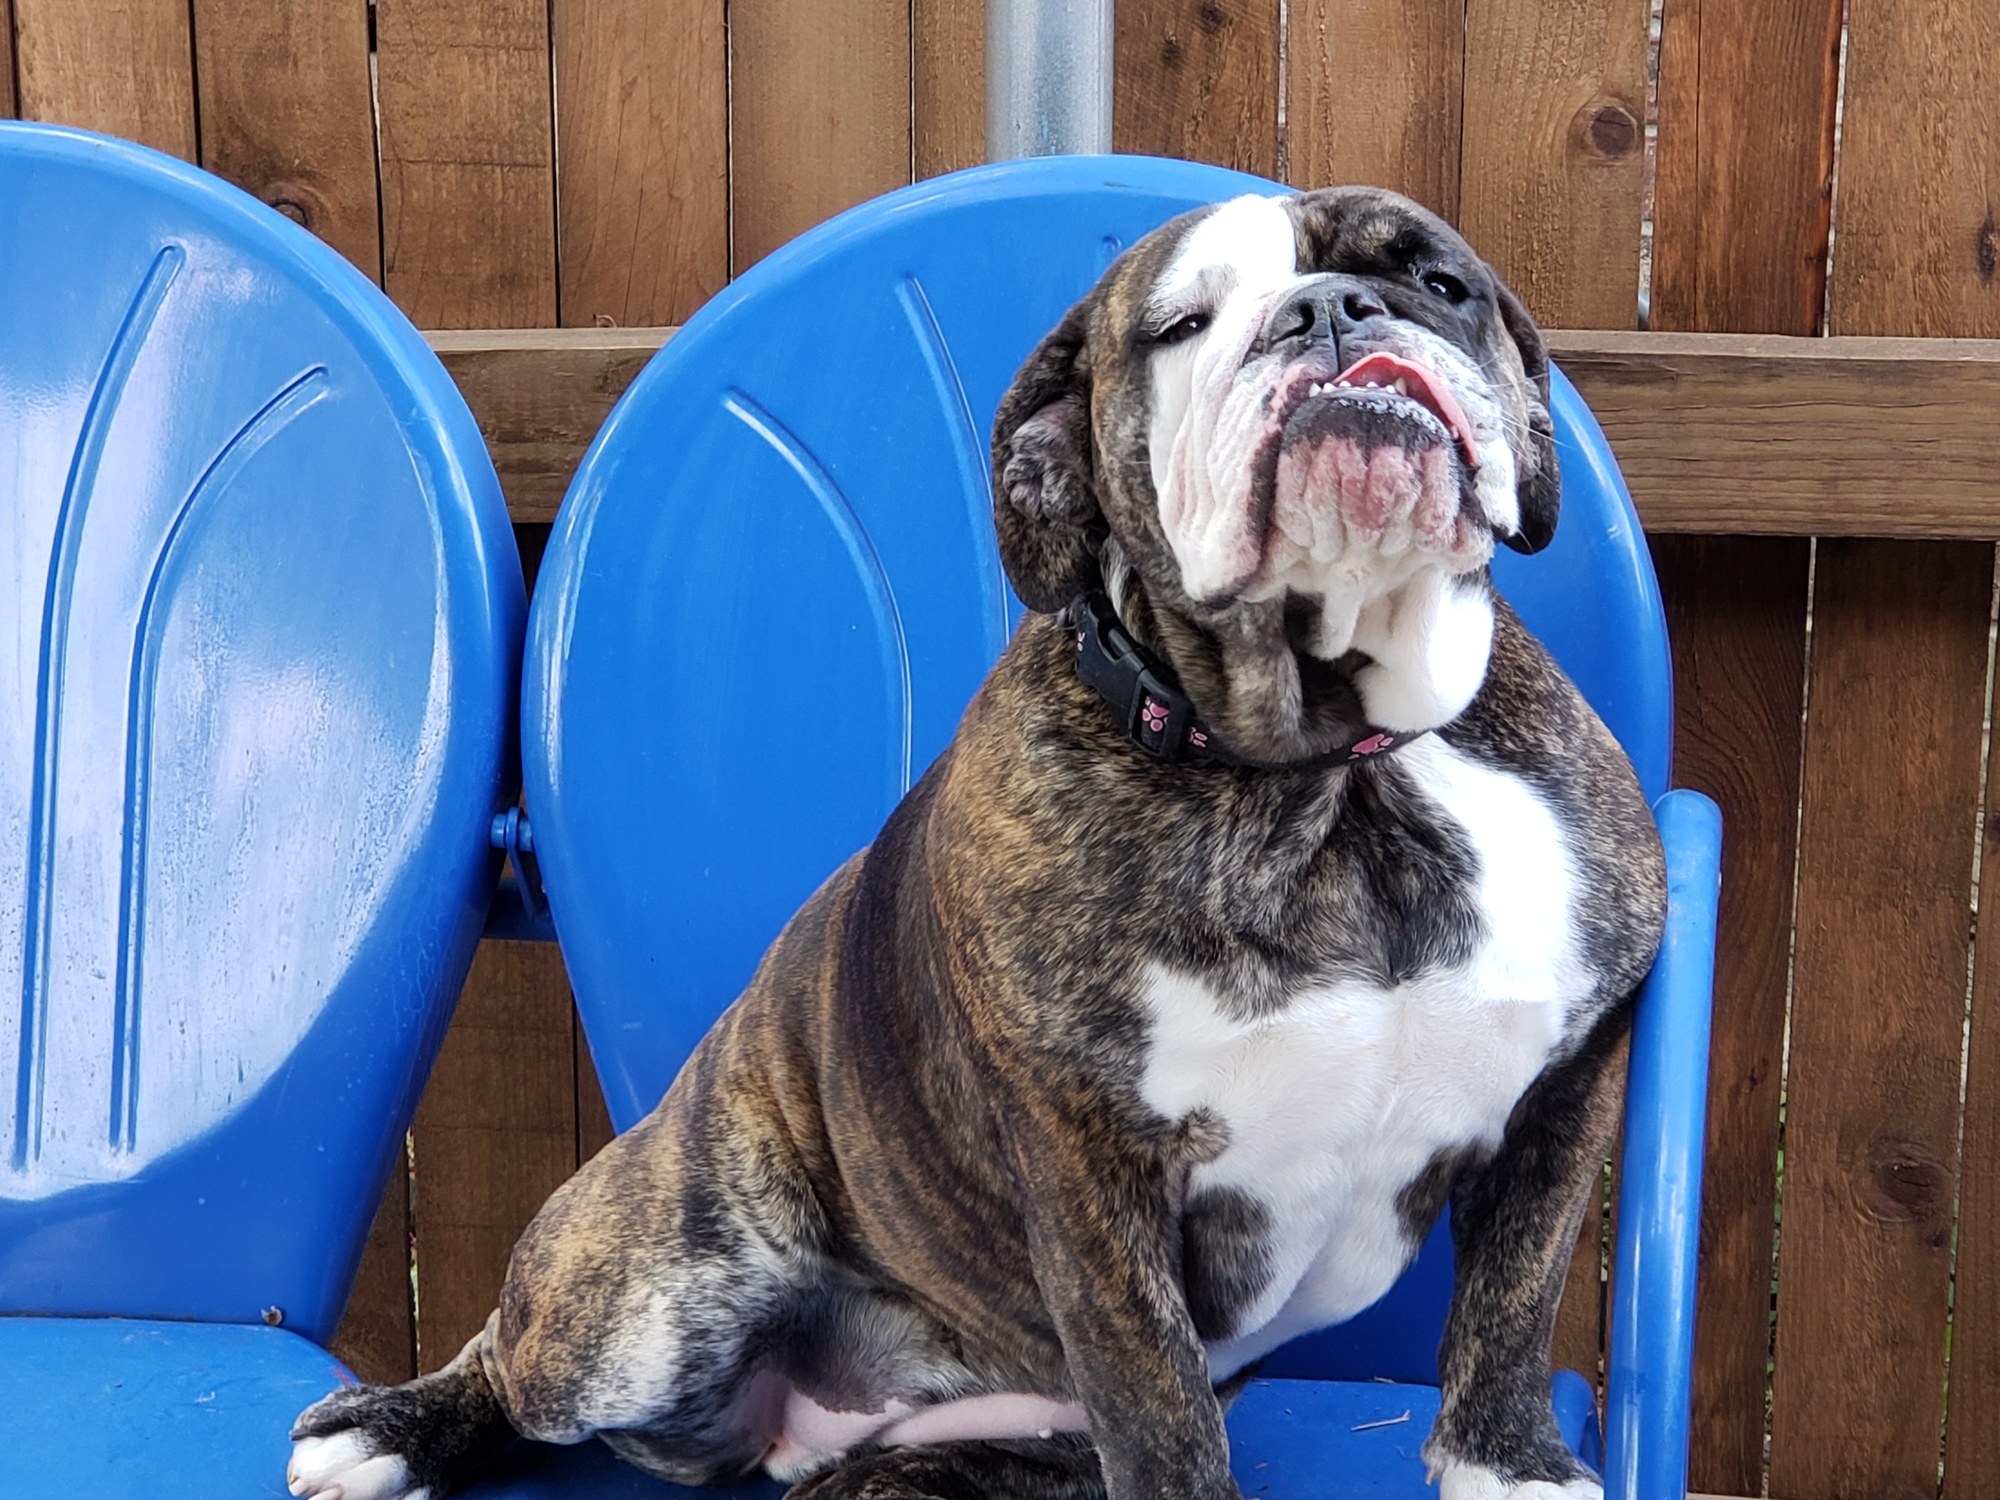 Maggie Mae the English Bulldog sits on a blue lawn chair with her tongue sticking out